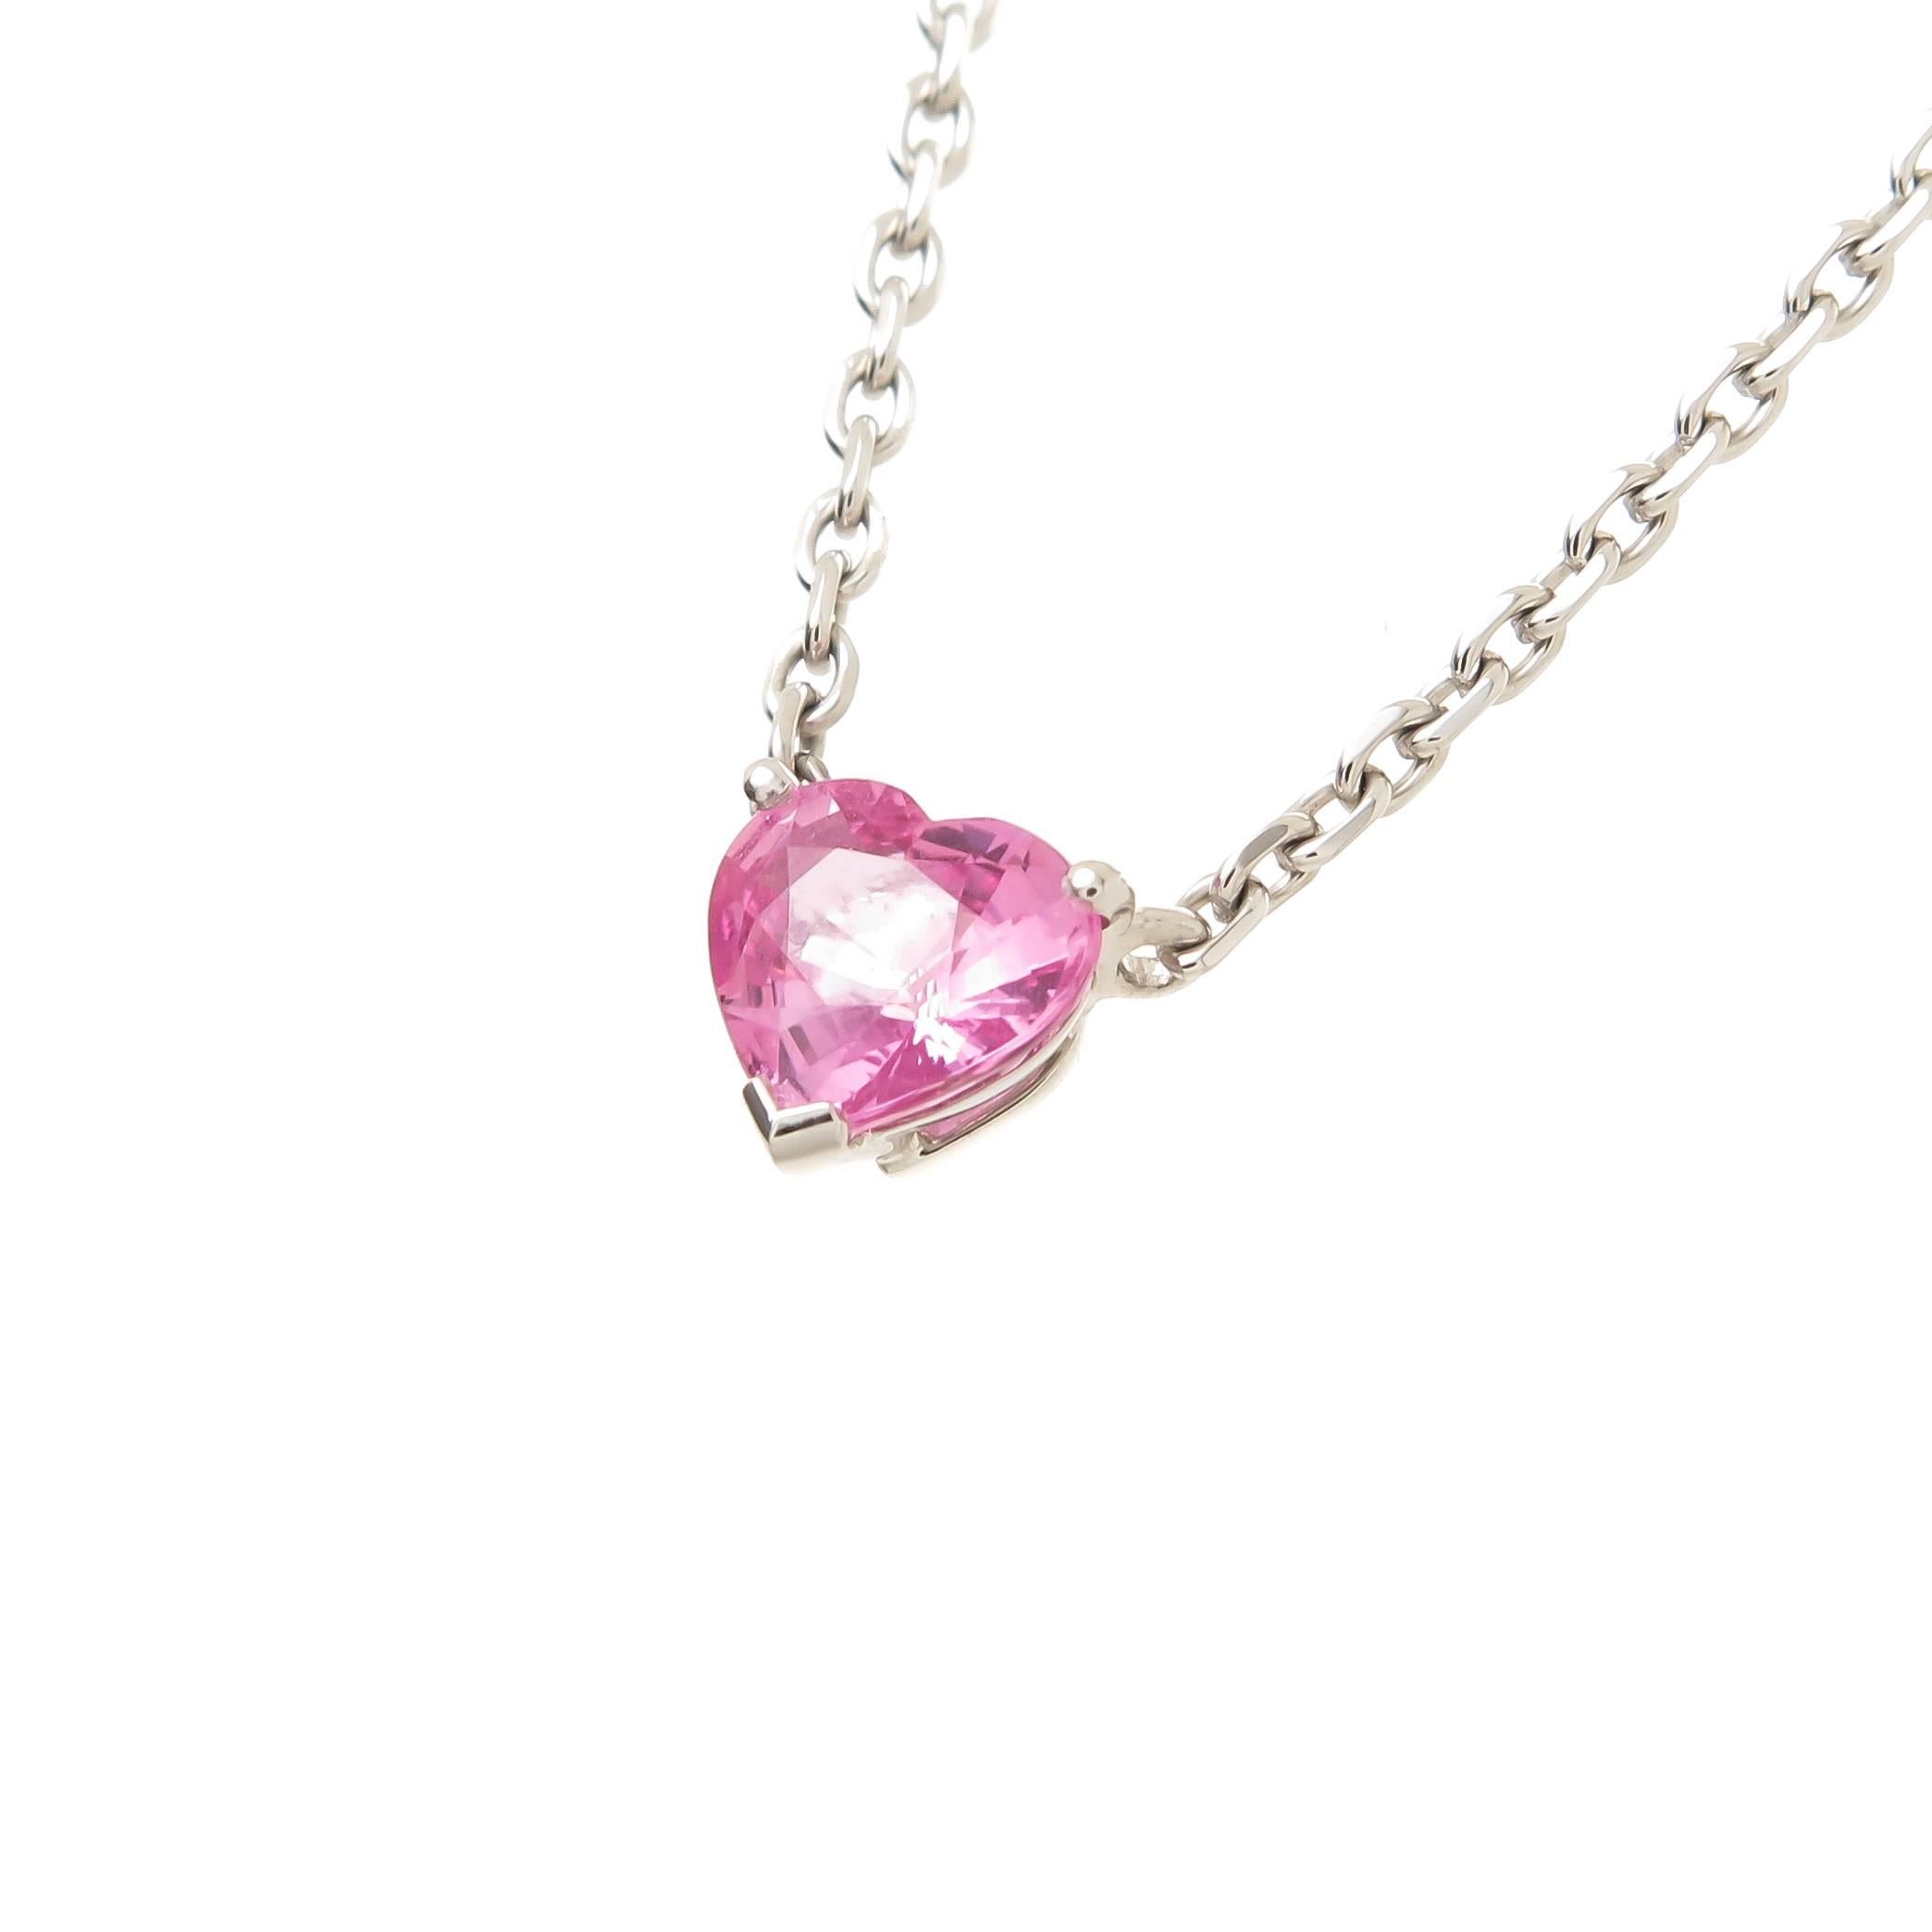 Circa 2015 Cartier Pink Sapphire Heart necklace, 18K White Gold and set with a very Fine, intense color Pink Heart Shape Sapphire of 1.25 Carats, 16 inch adjustable chain. Signed, Numbered and comes in the original Cartier presentation box.